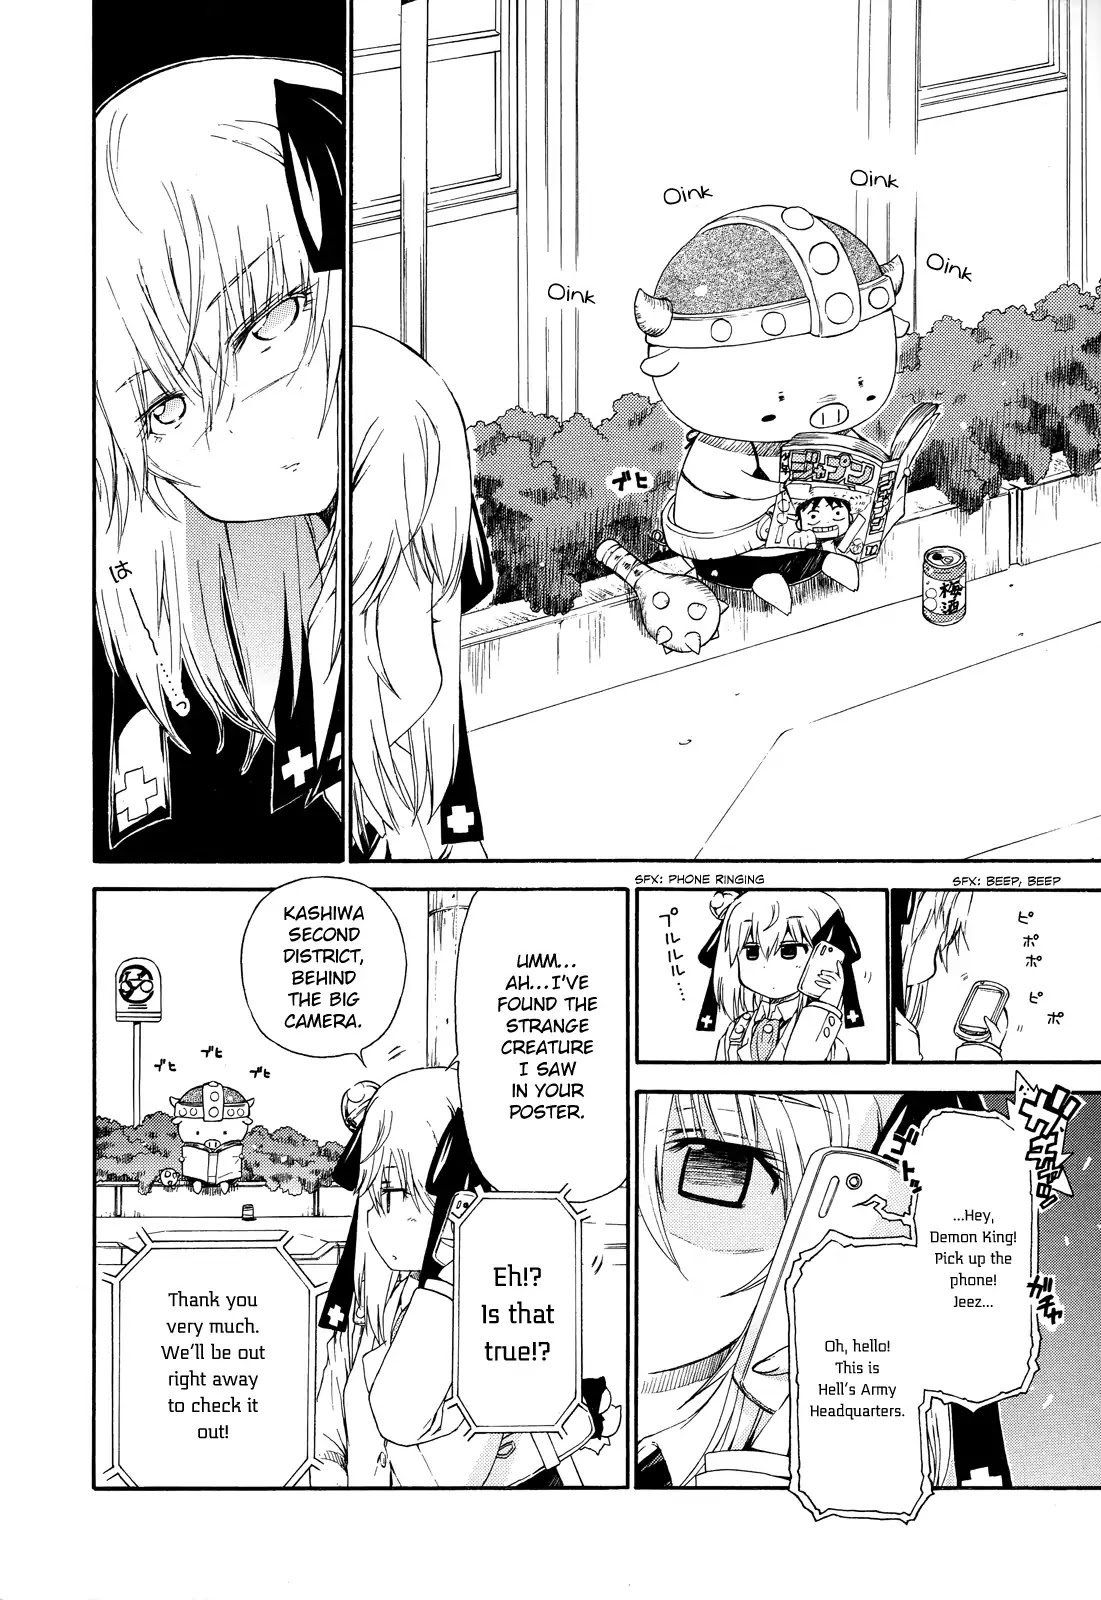 Ashita no Kyouko-san Chapter 21.5: The Thing Searched For